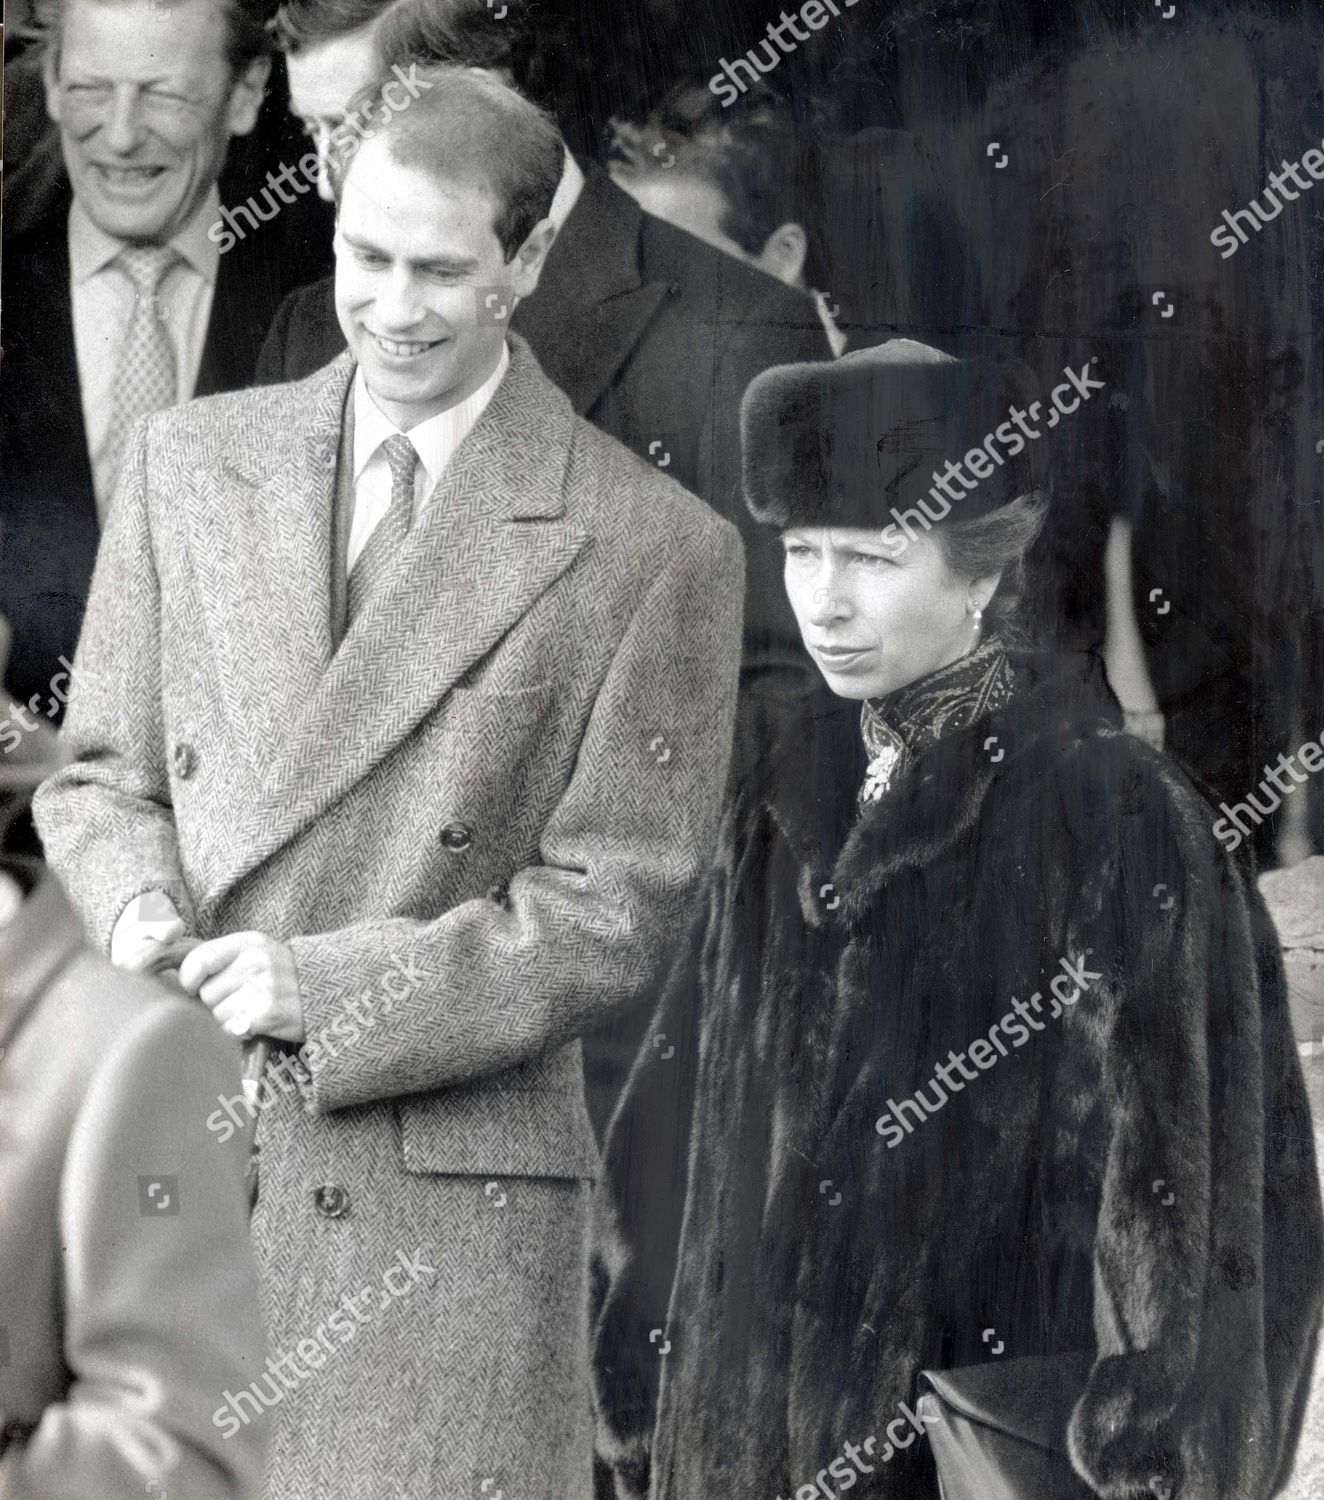 princess-anne-now-princess-royal-1989-picture-shows-princess-royal-and-prince-edward-at-church-near-sandringham-shutterstock-editorial-930453a.jpg